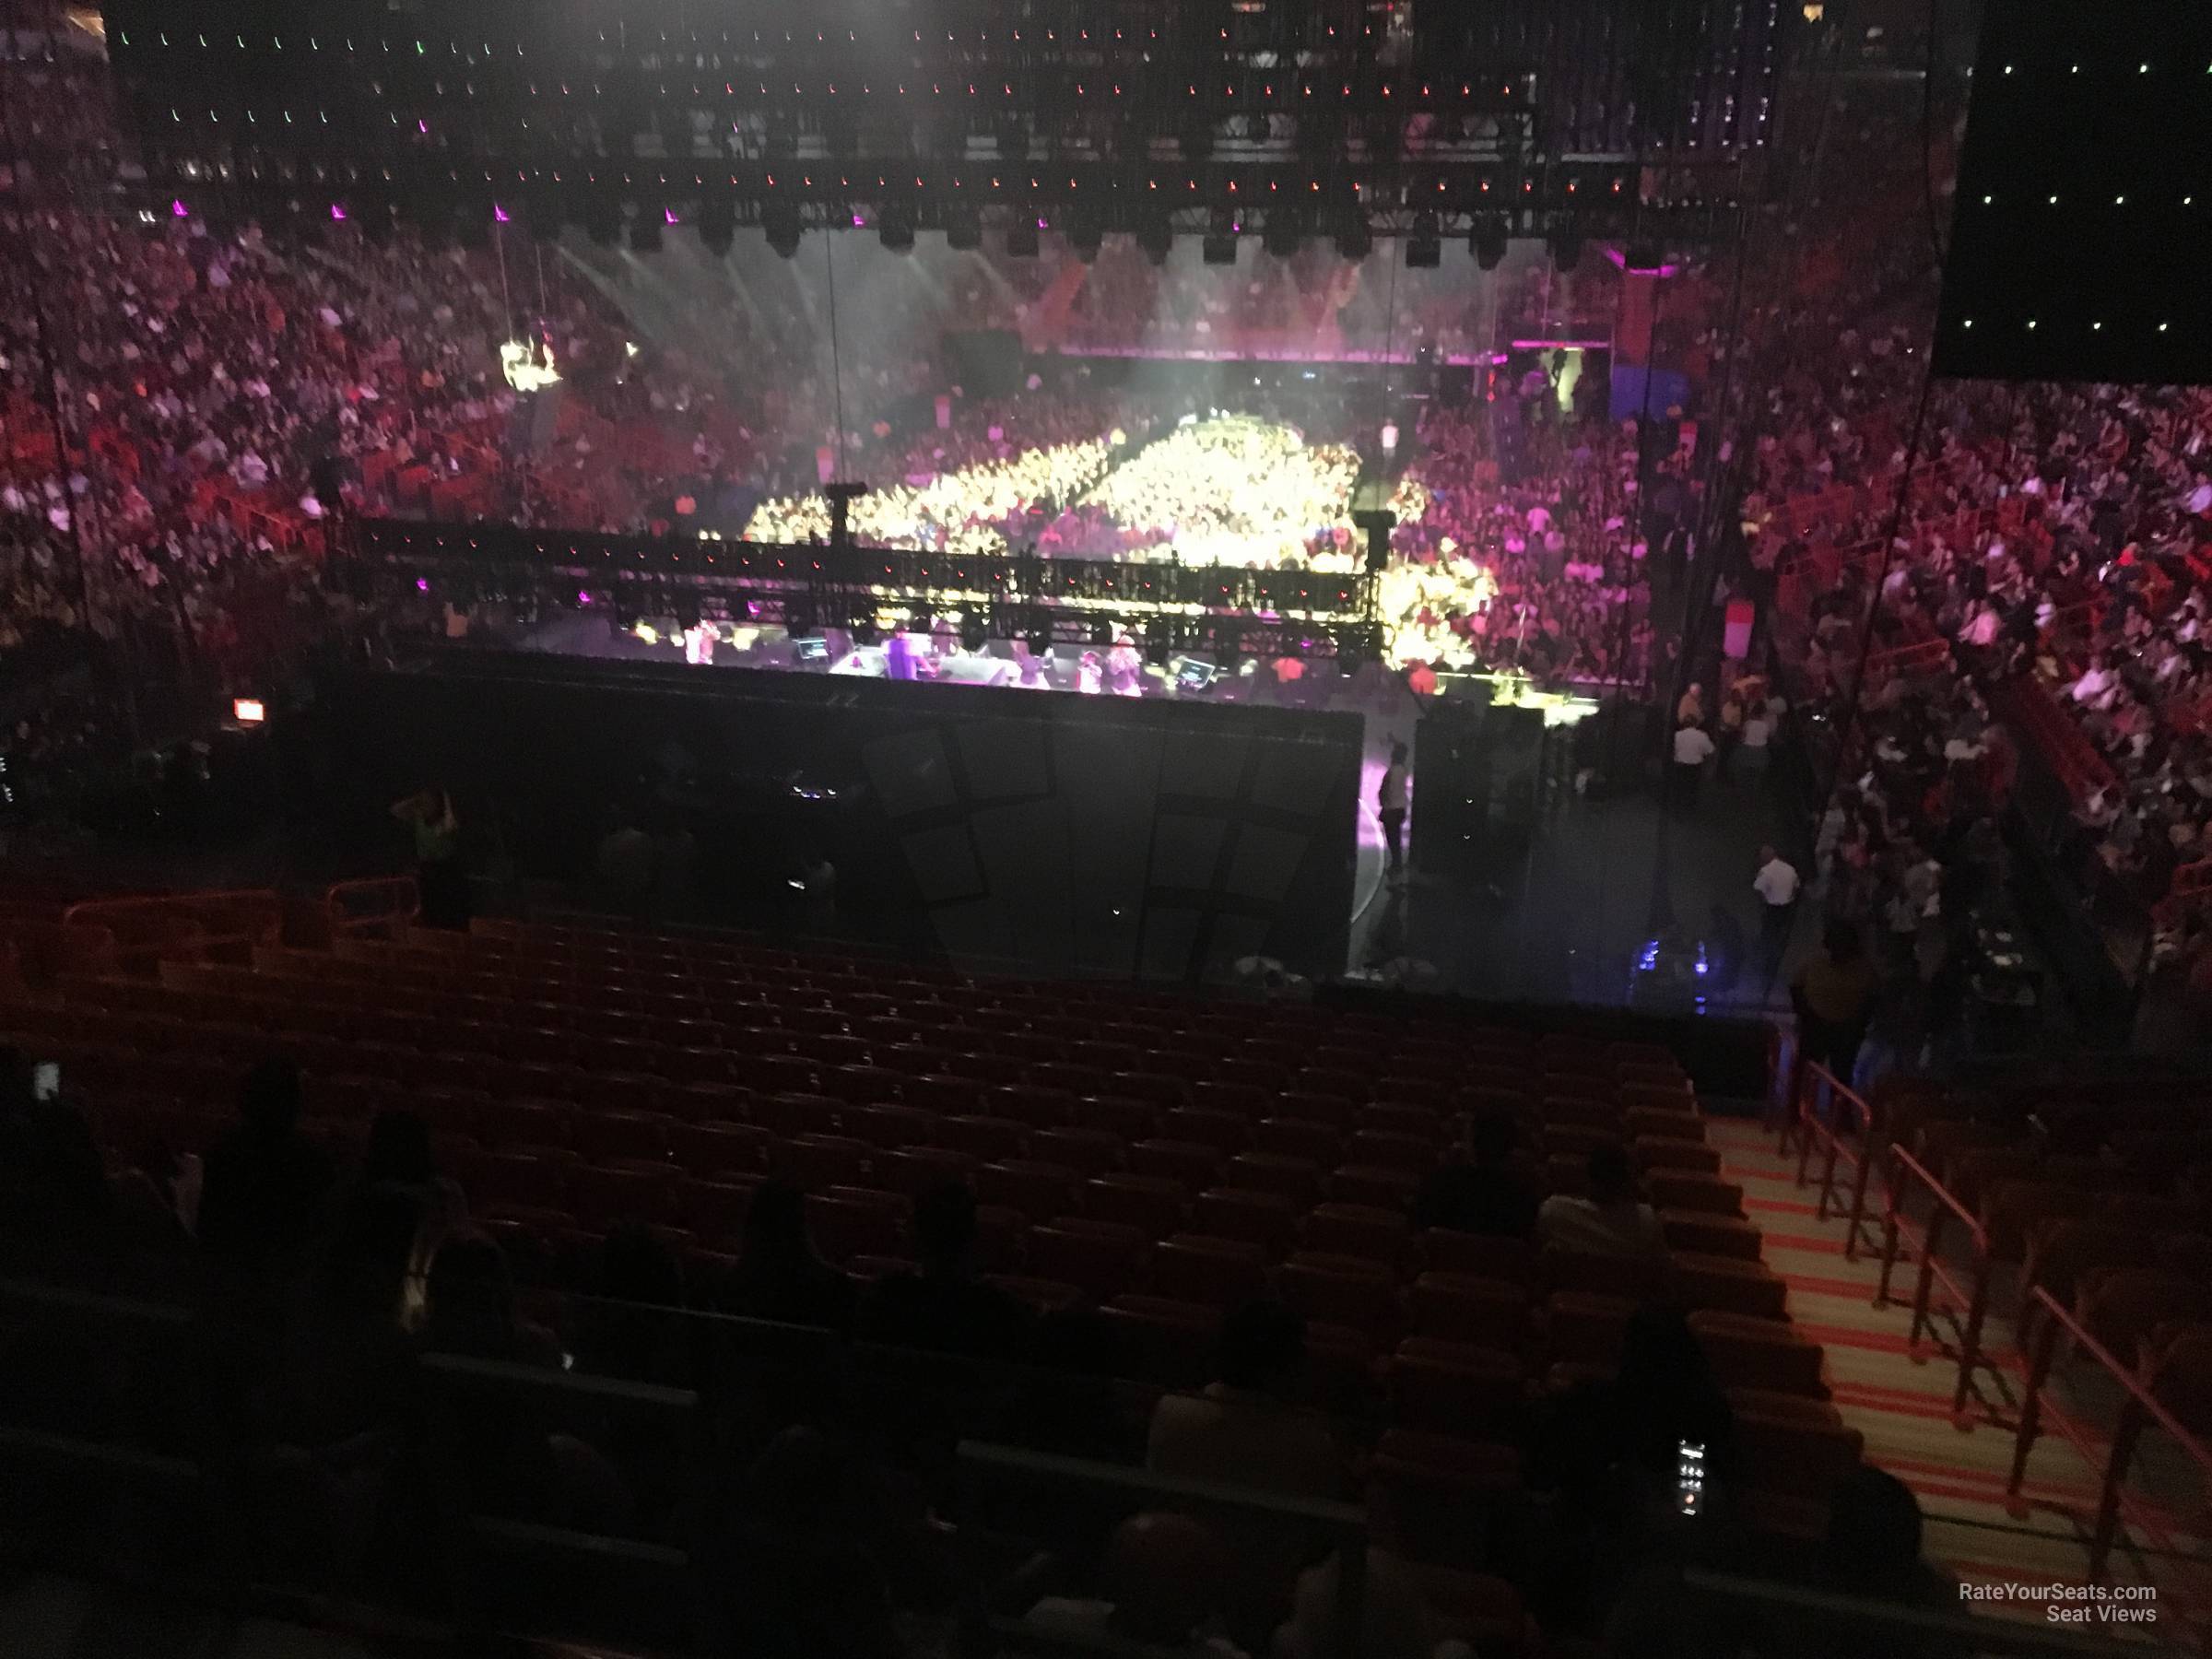 section 124, row 37 seat view  for concert - miami-dade arena